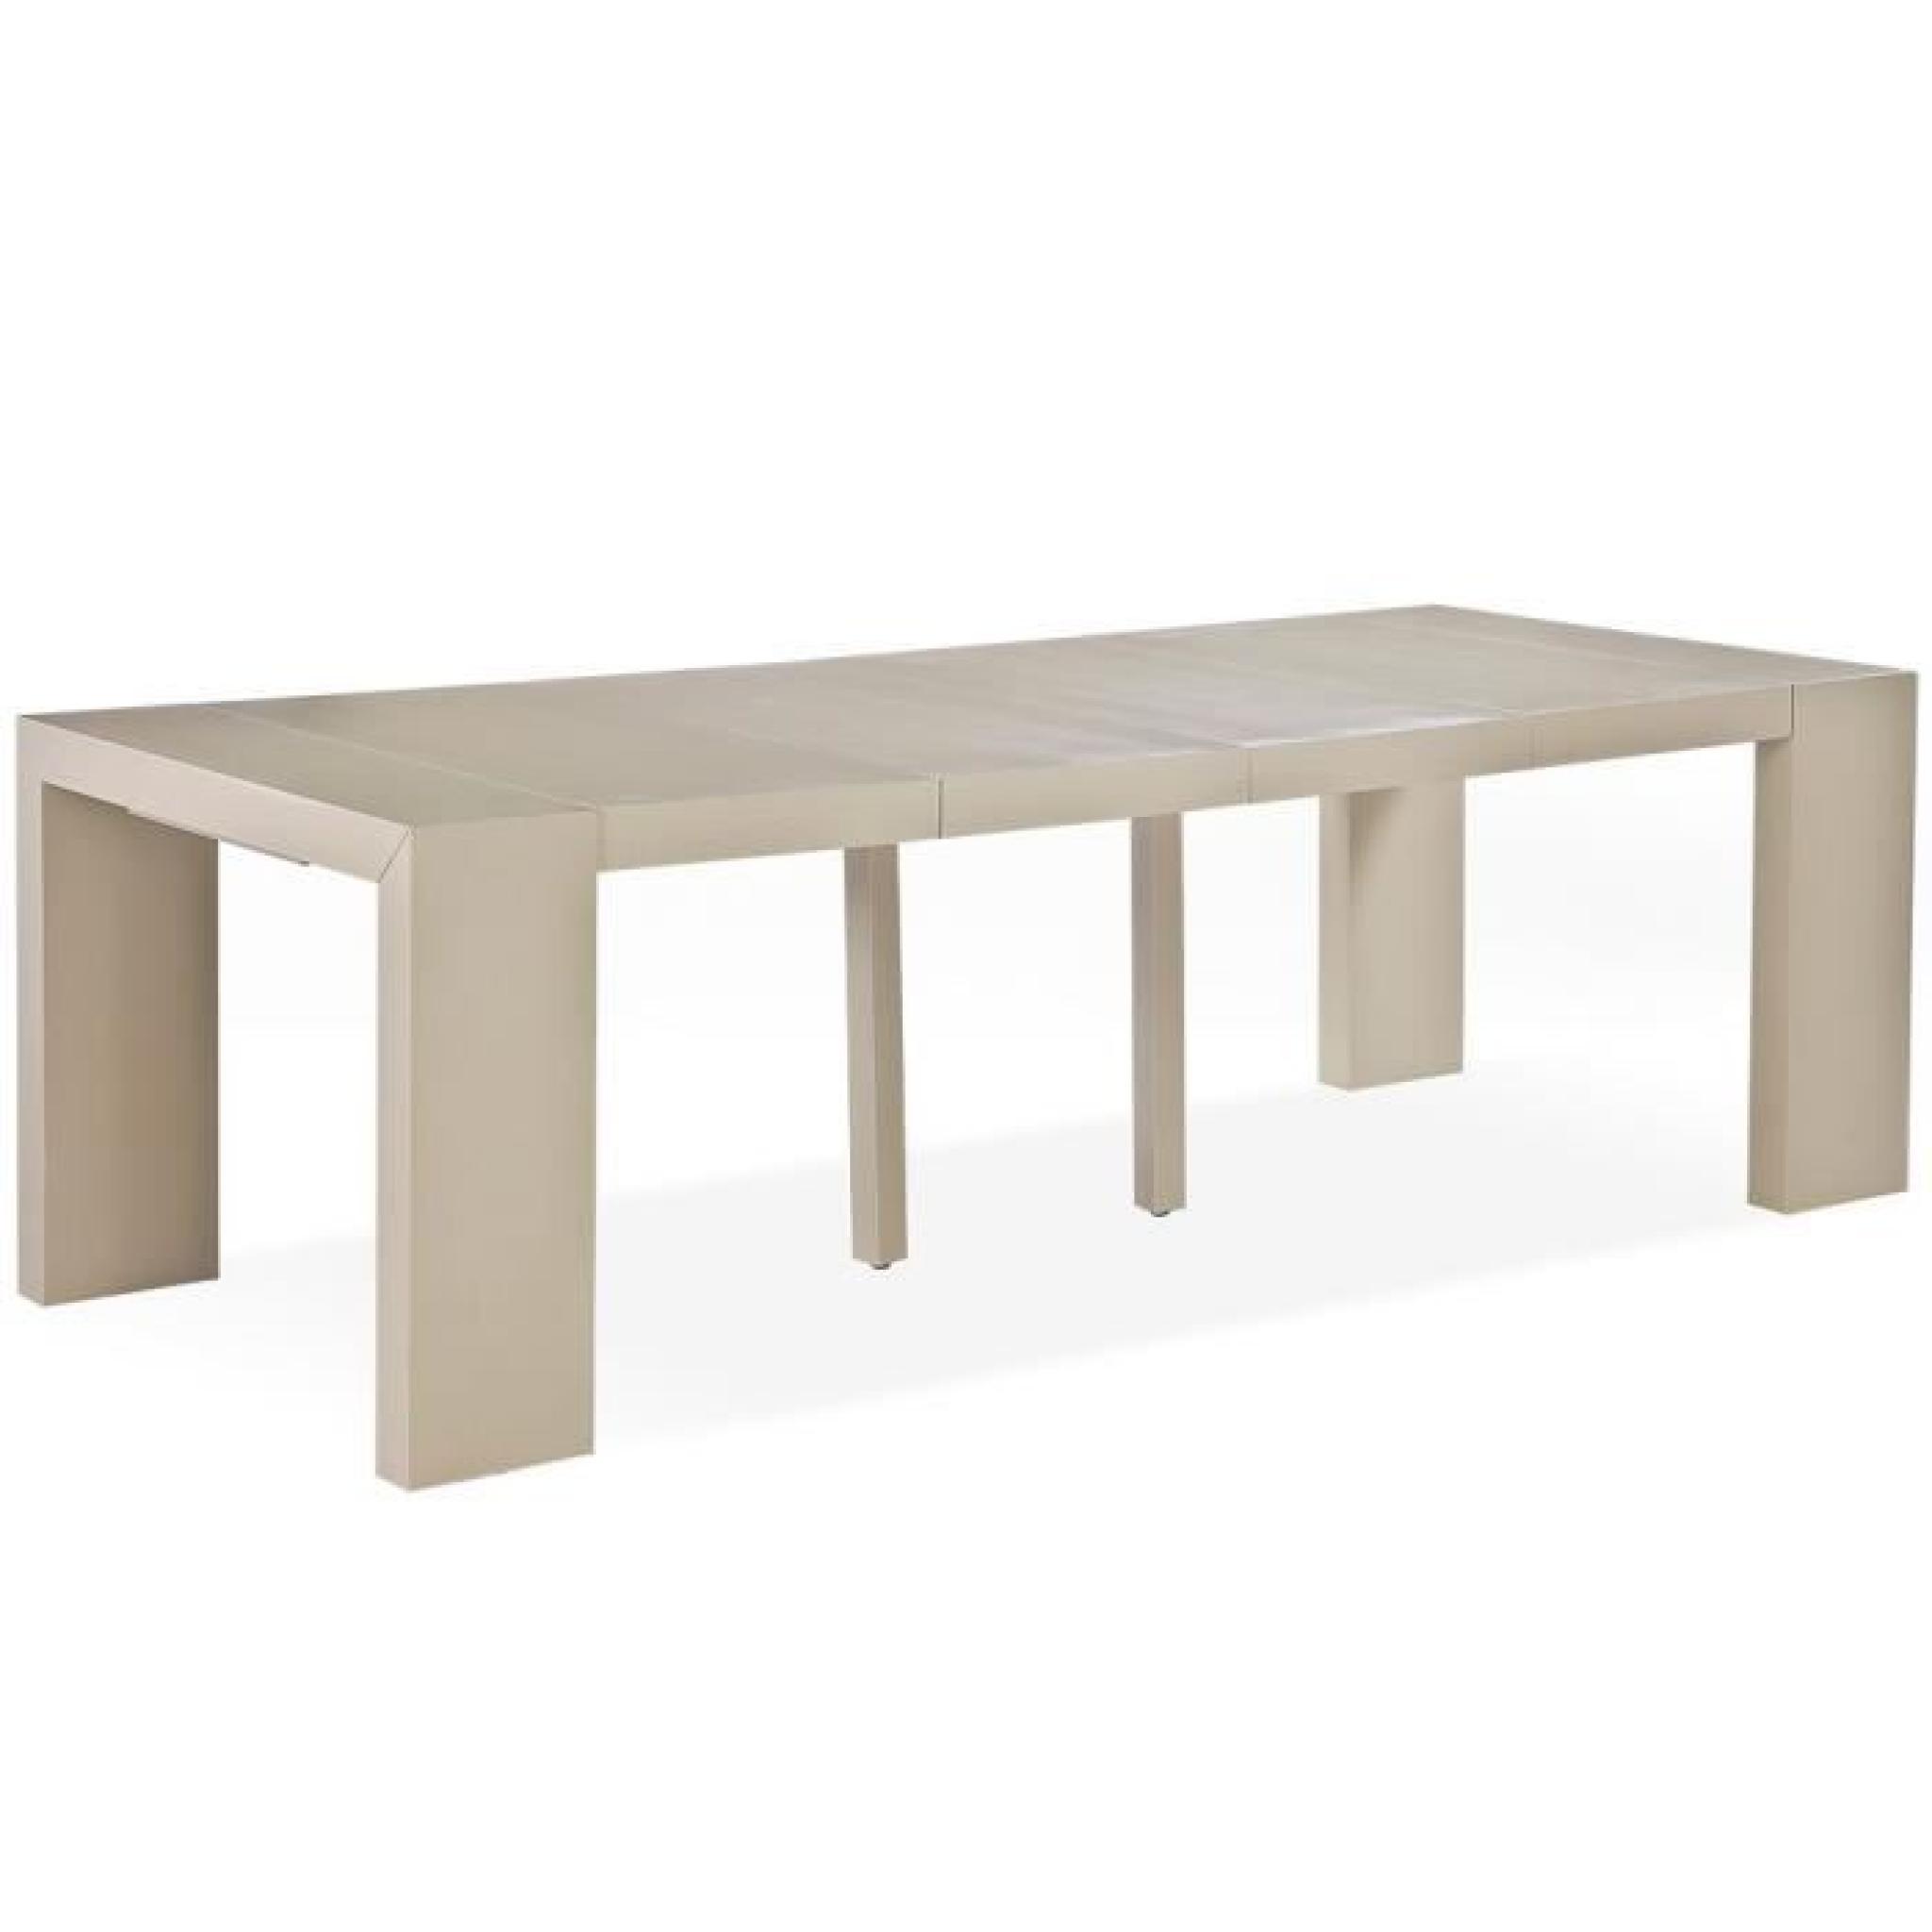 Table console Woodini XL Taupe Clair pas cher